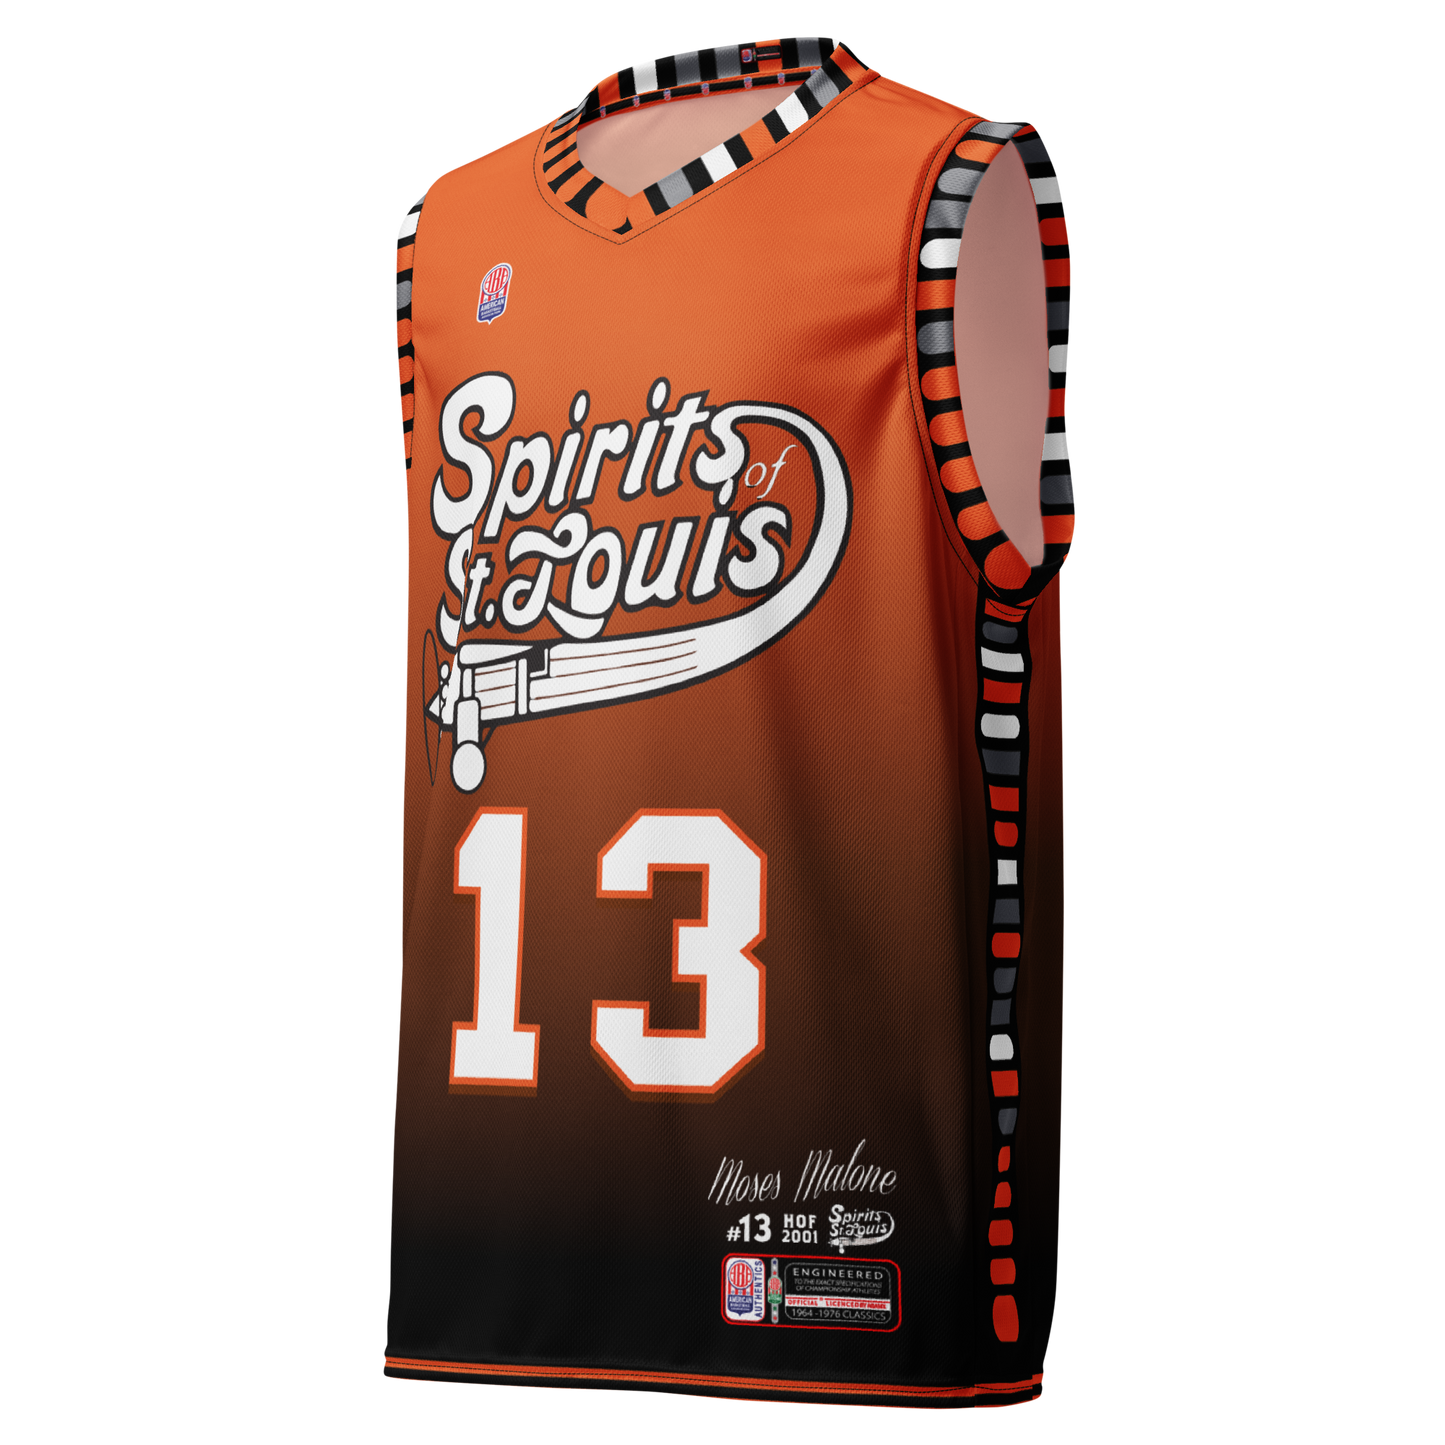 Limited-edition Moses Malone #15 jersey